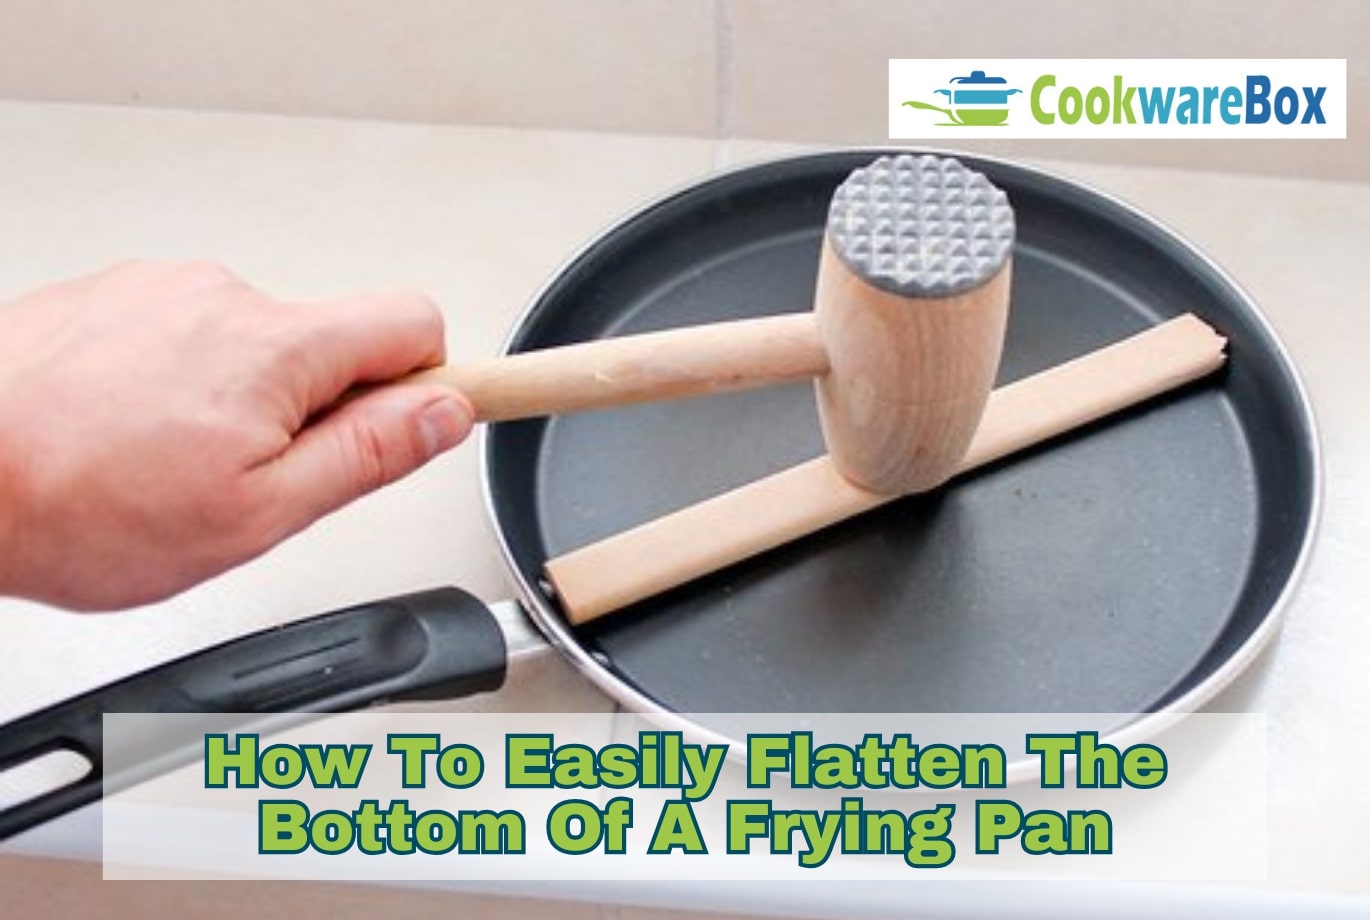 How To Flatten The Bottom Of A Frying Pan: Essential Tips